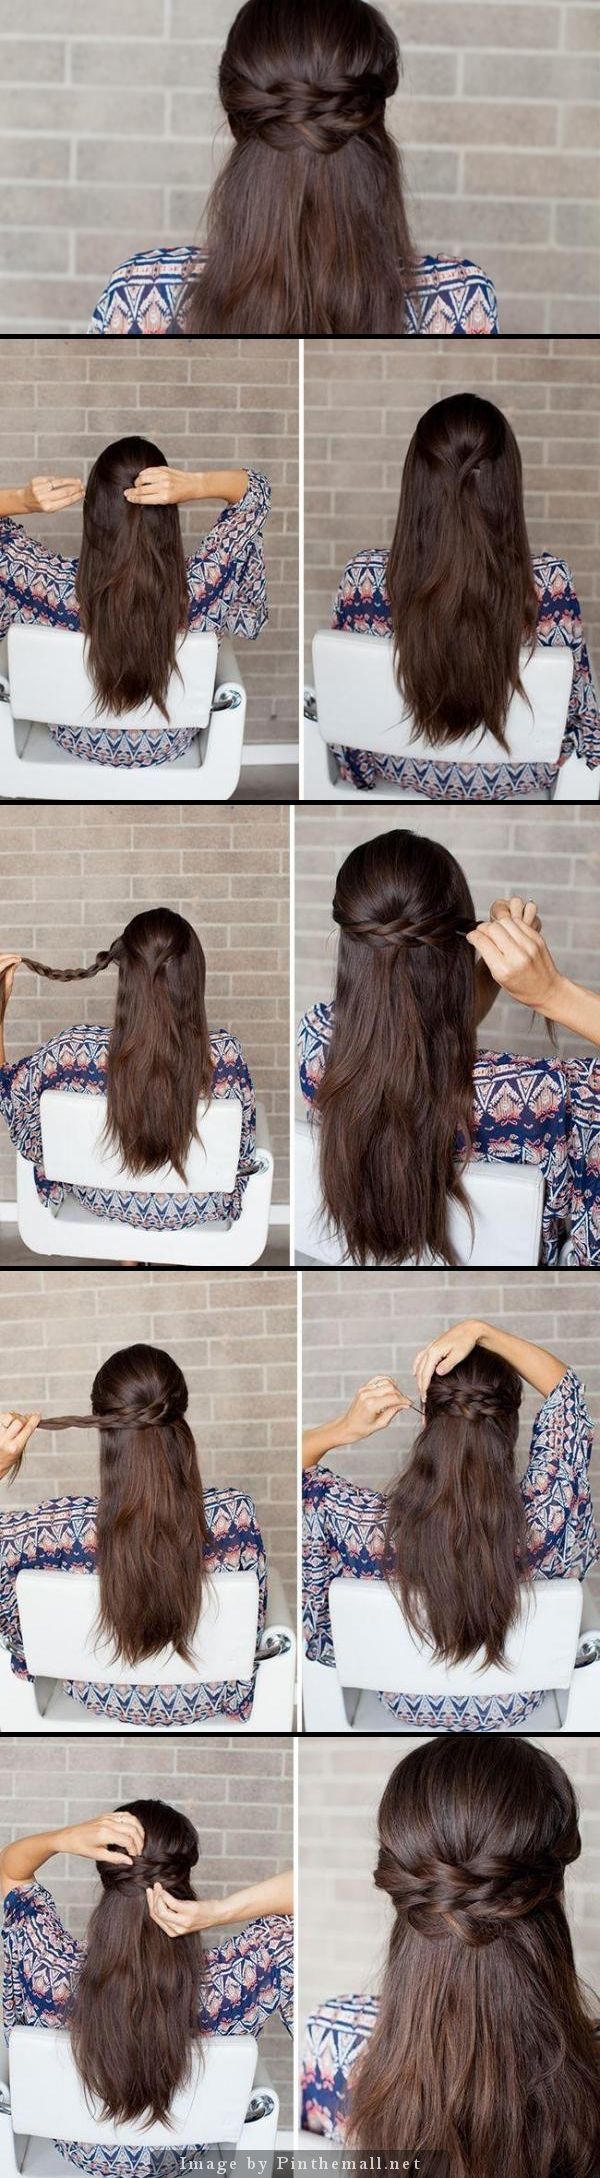 This style can work for any type of hair from short to long and straight to curly!